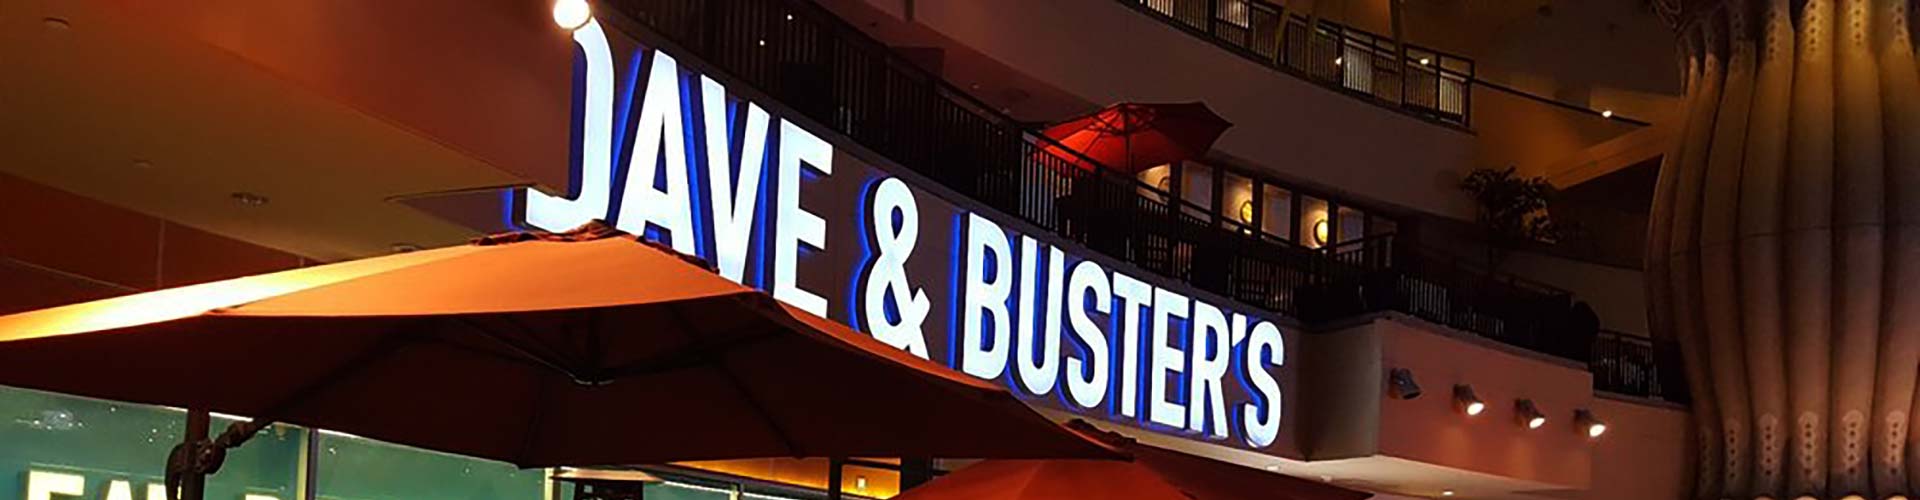 Dave And Busters Header 1920x500